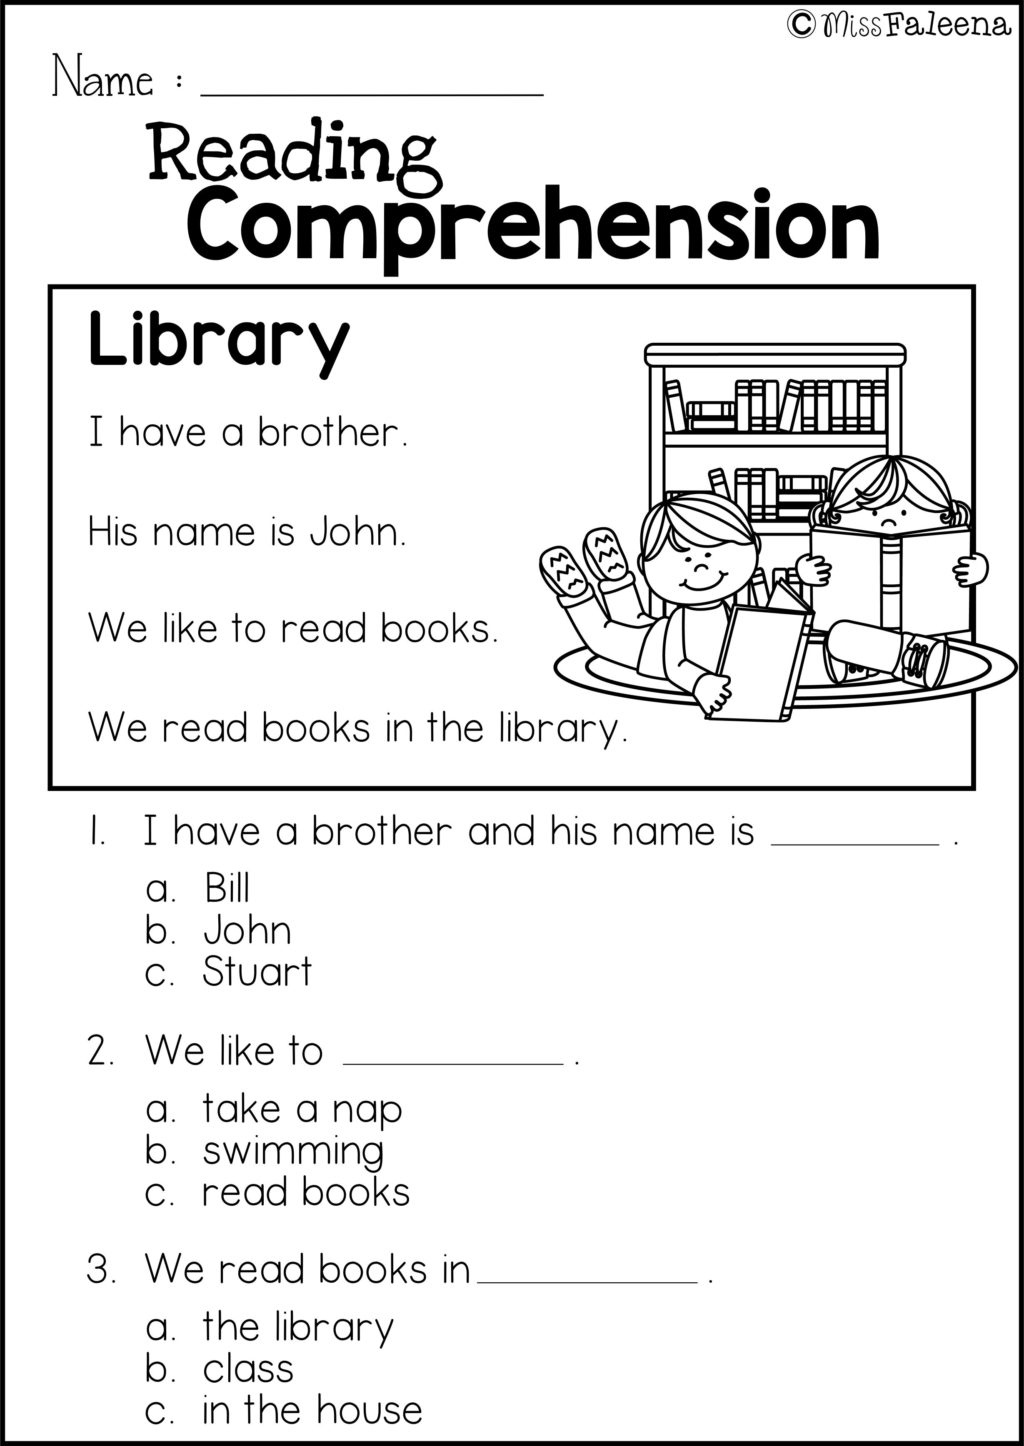 Reading Comprehension Worksheets 5th Grade Multiple Choice Times 